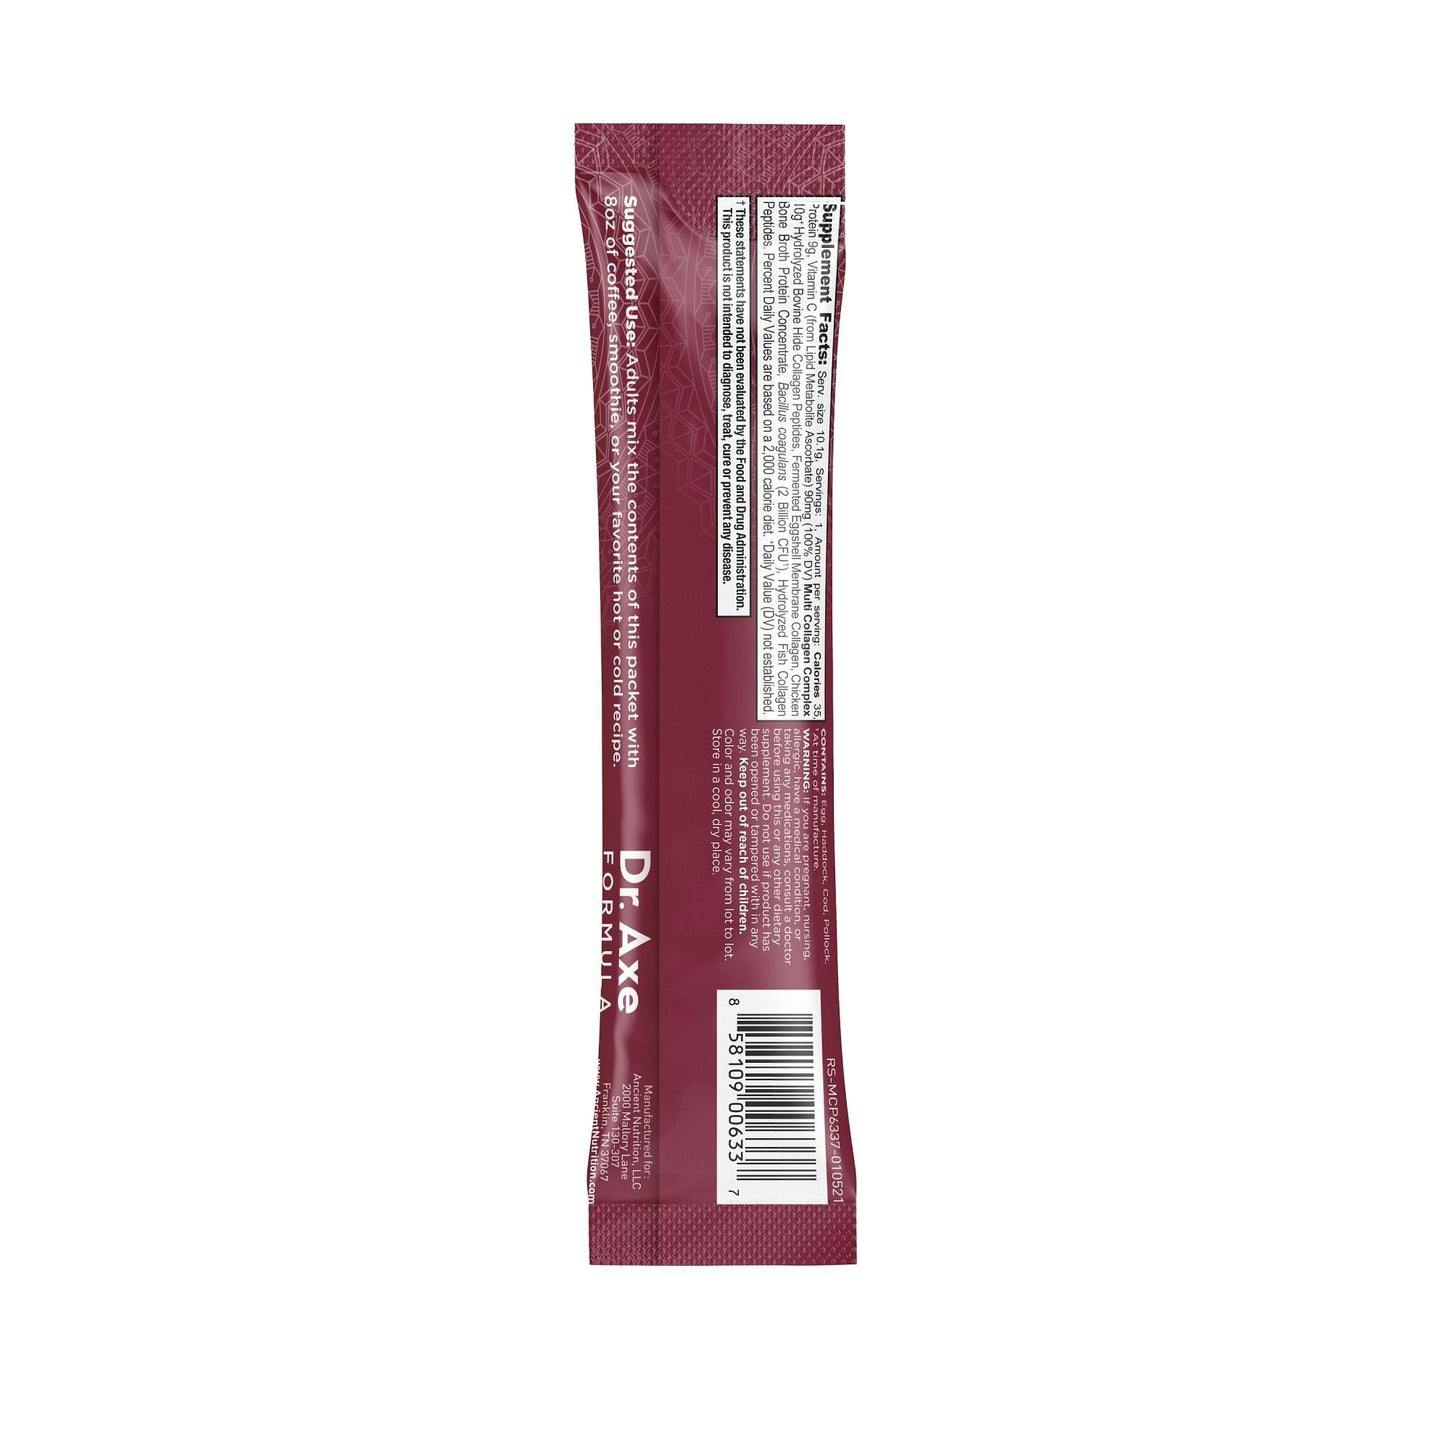 muti collagen protein stick packs back of stick pack